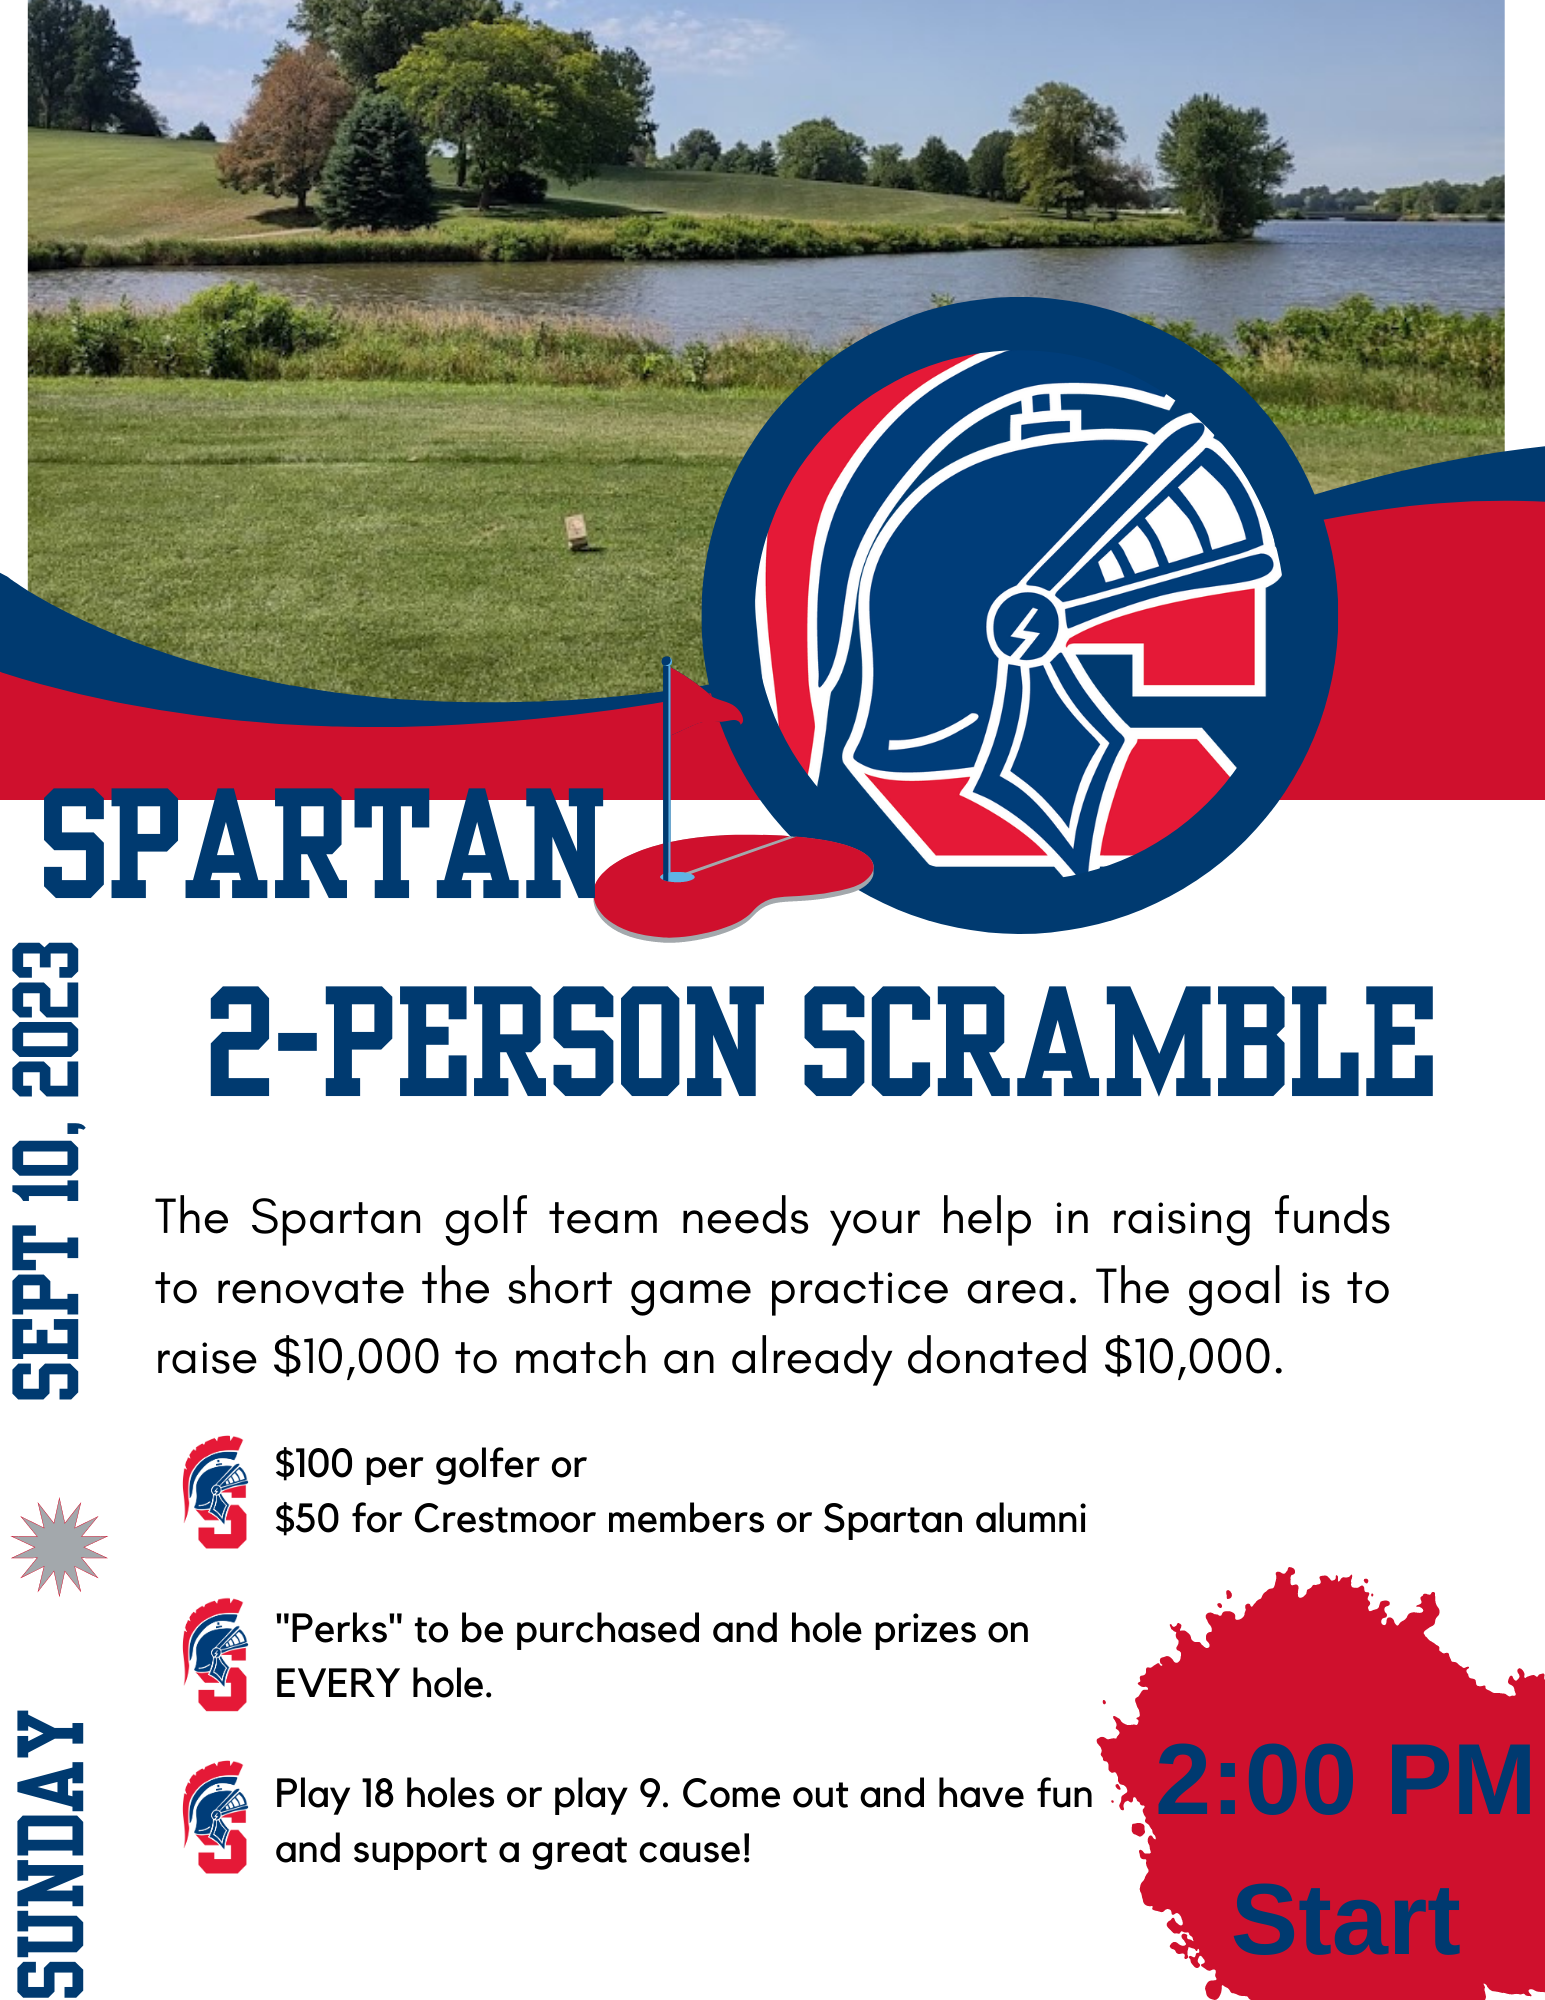 Join the Southwestern Golf Team's 2-Person Scramble Fundraiser